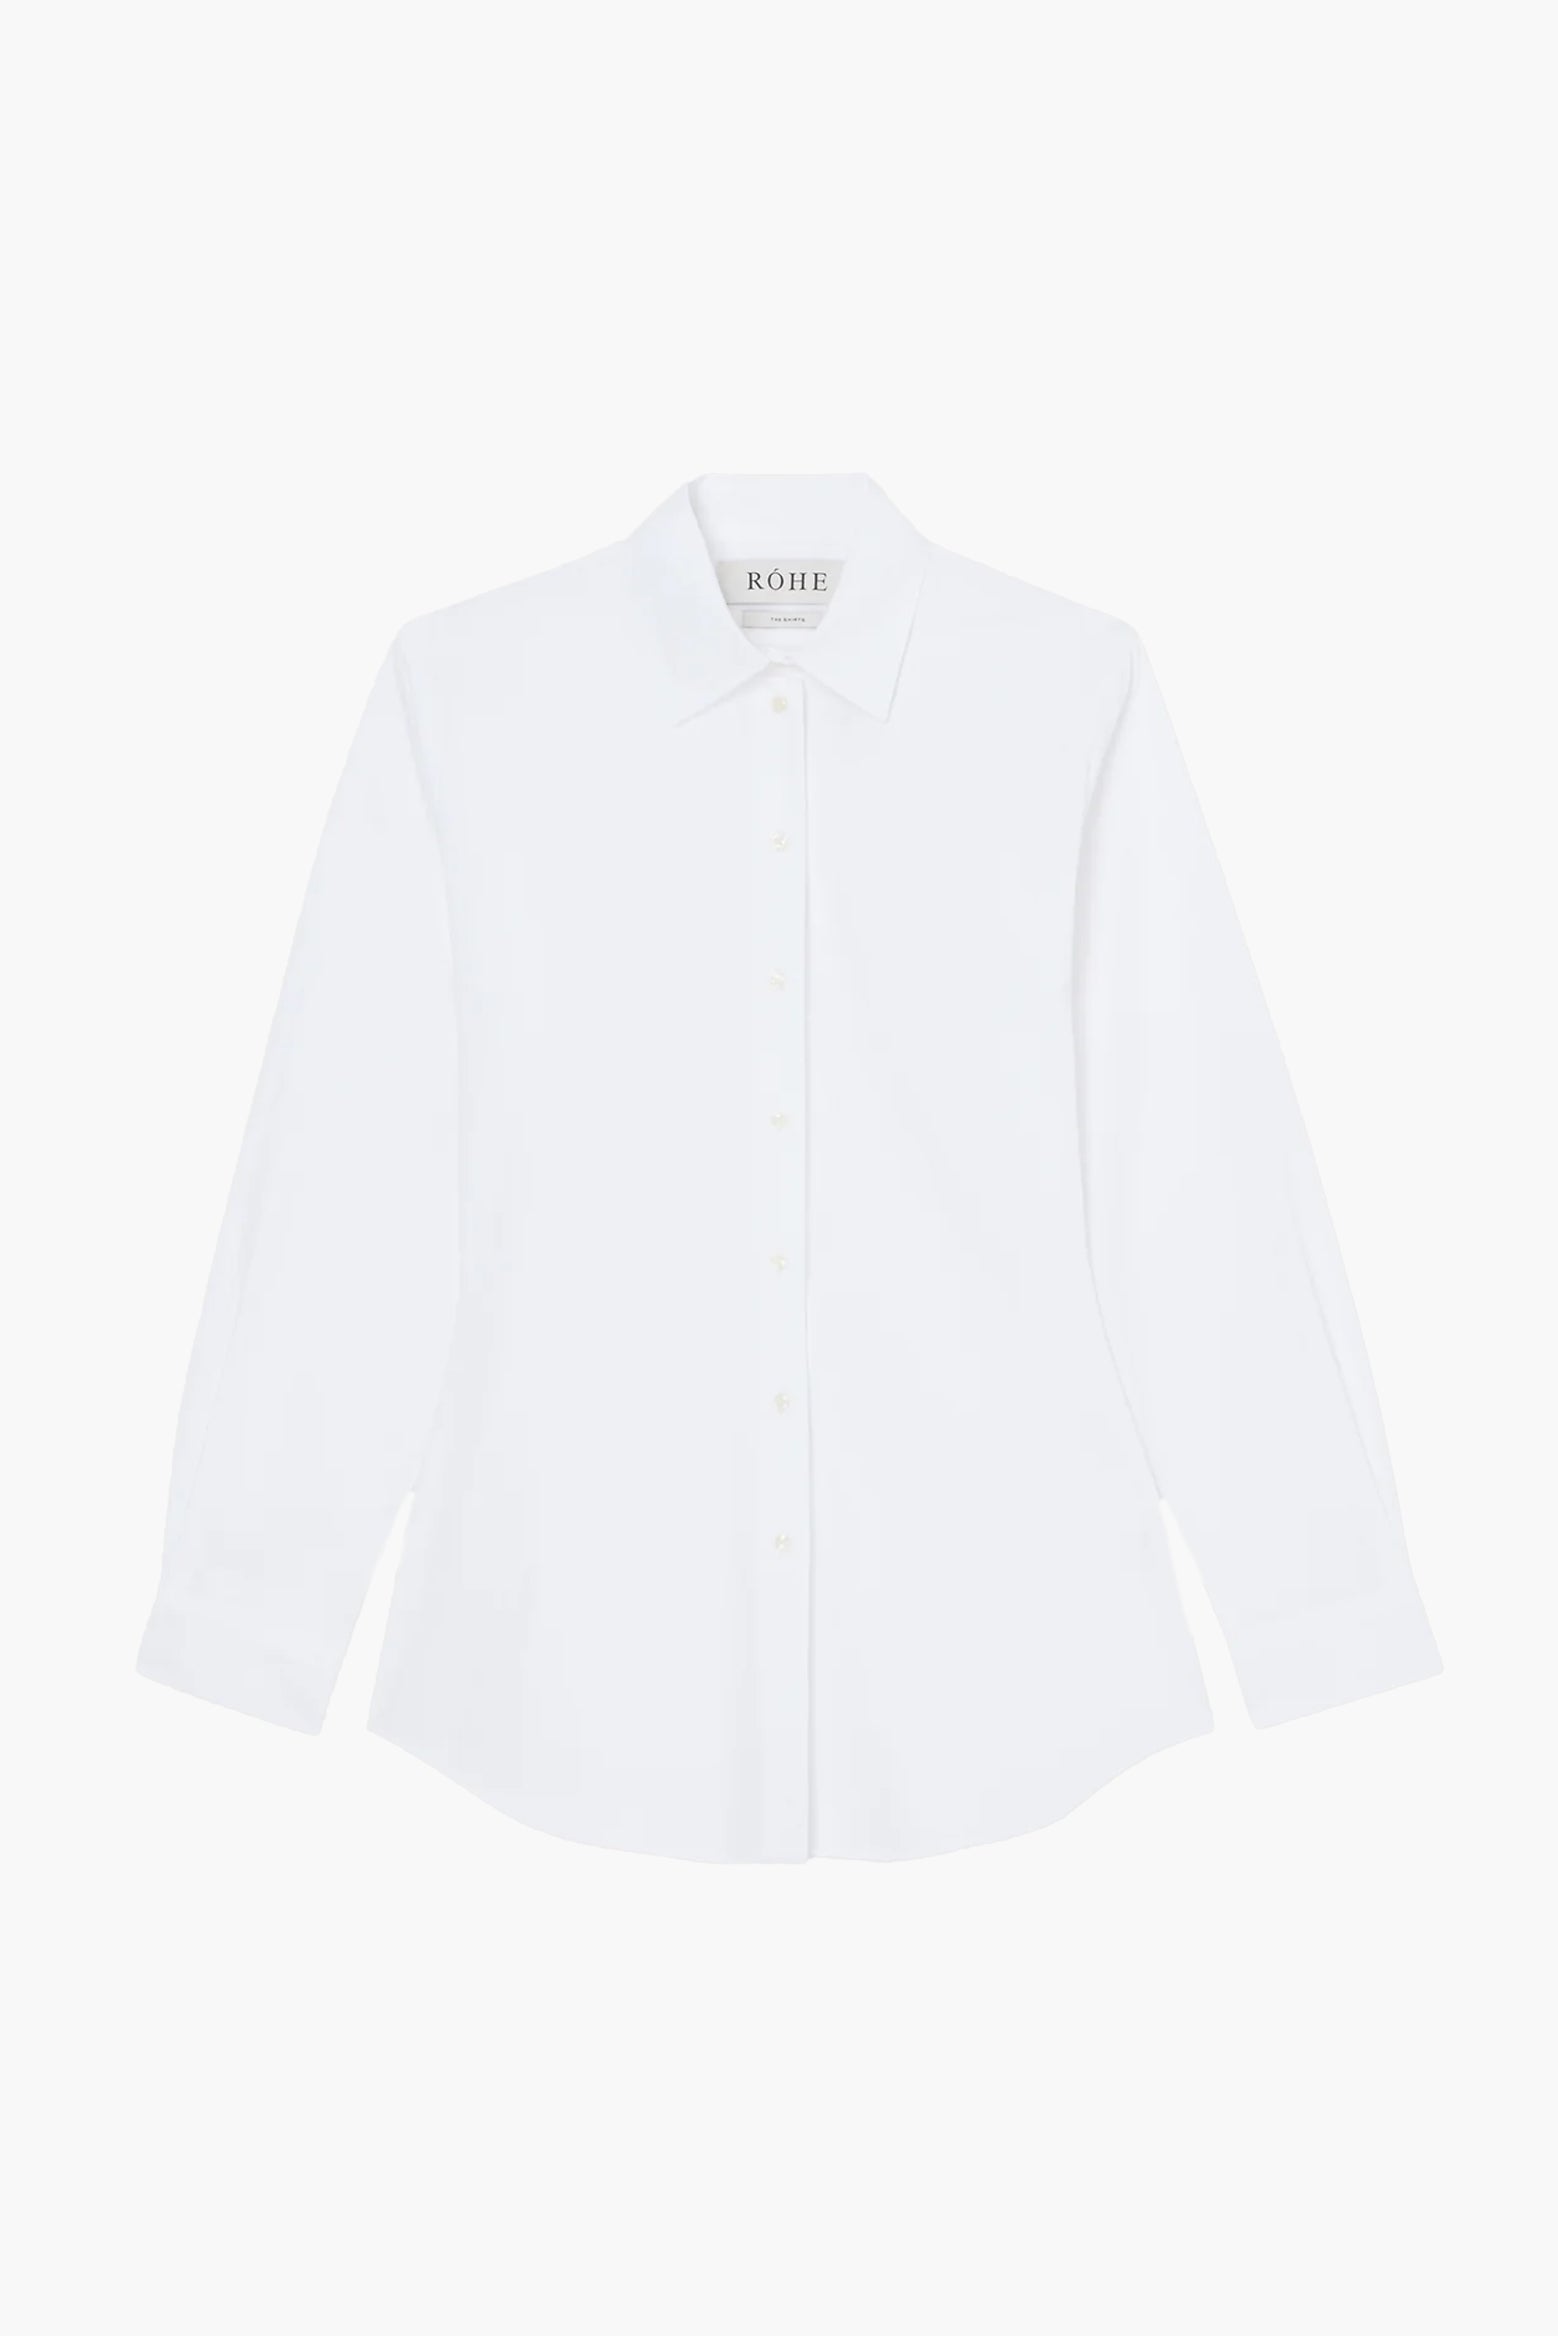 Rohe Shaped Poplin Shirt in White available at The New Trend Australia. 